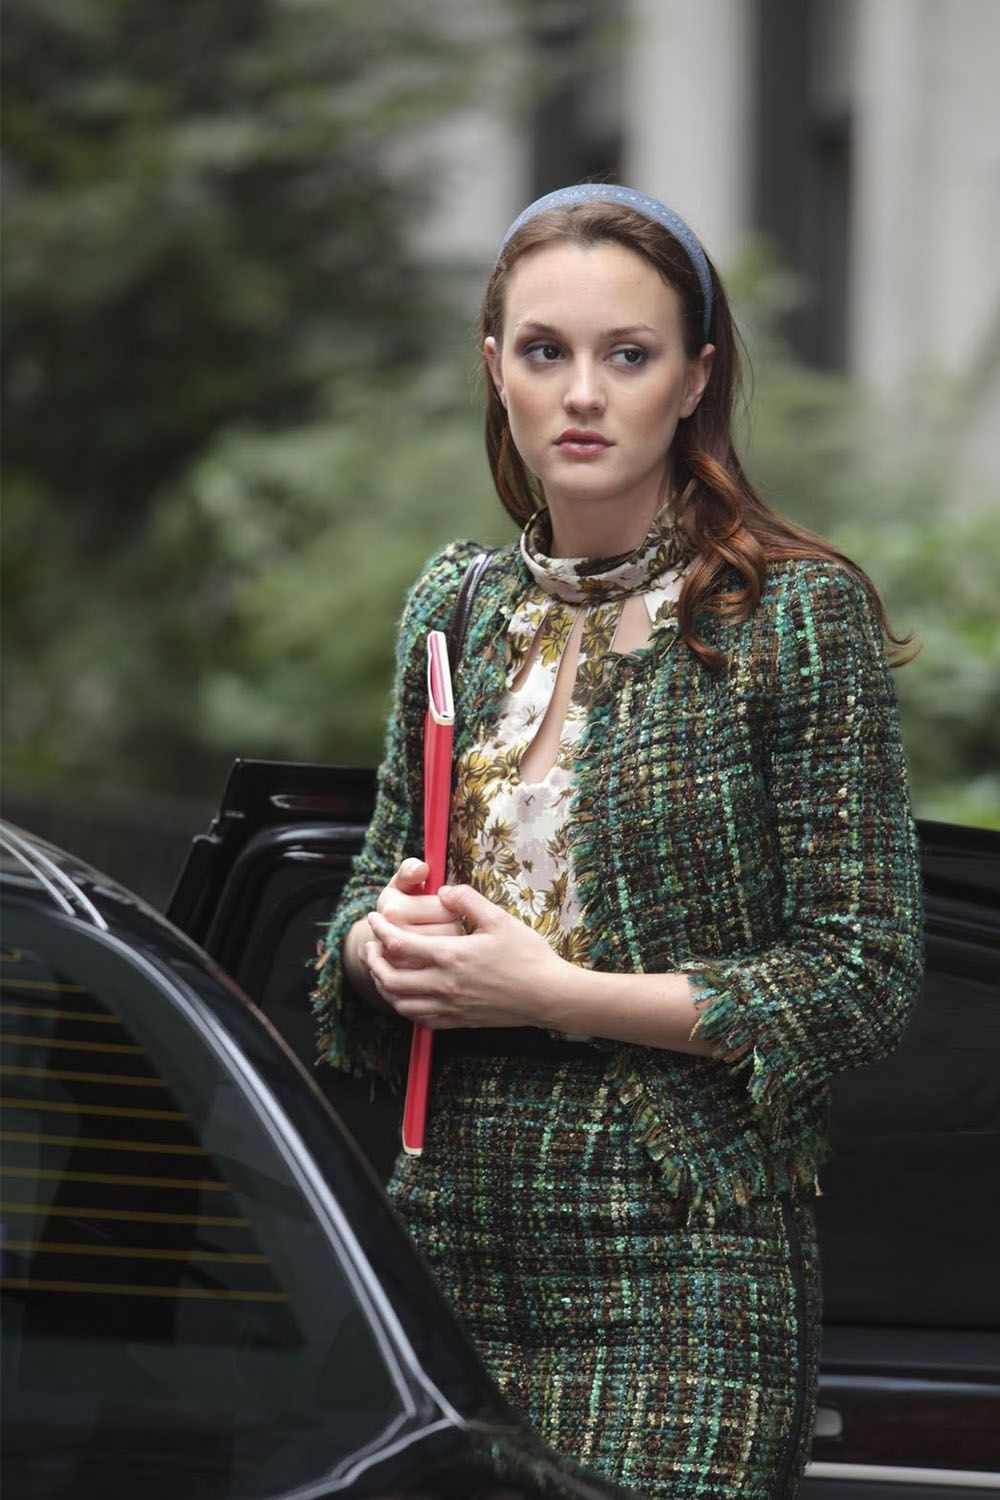 blair gossip girl inspired outfits